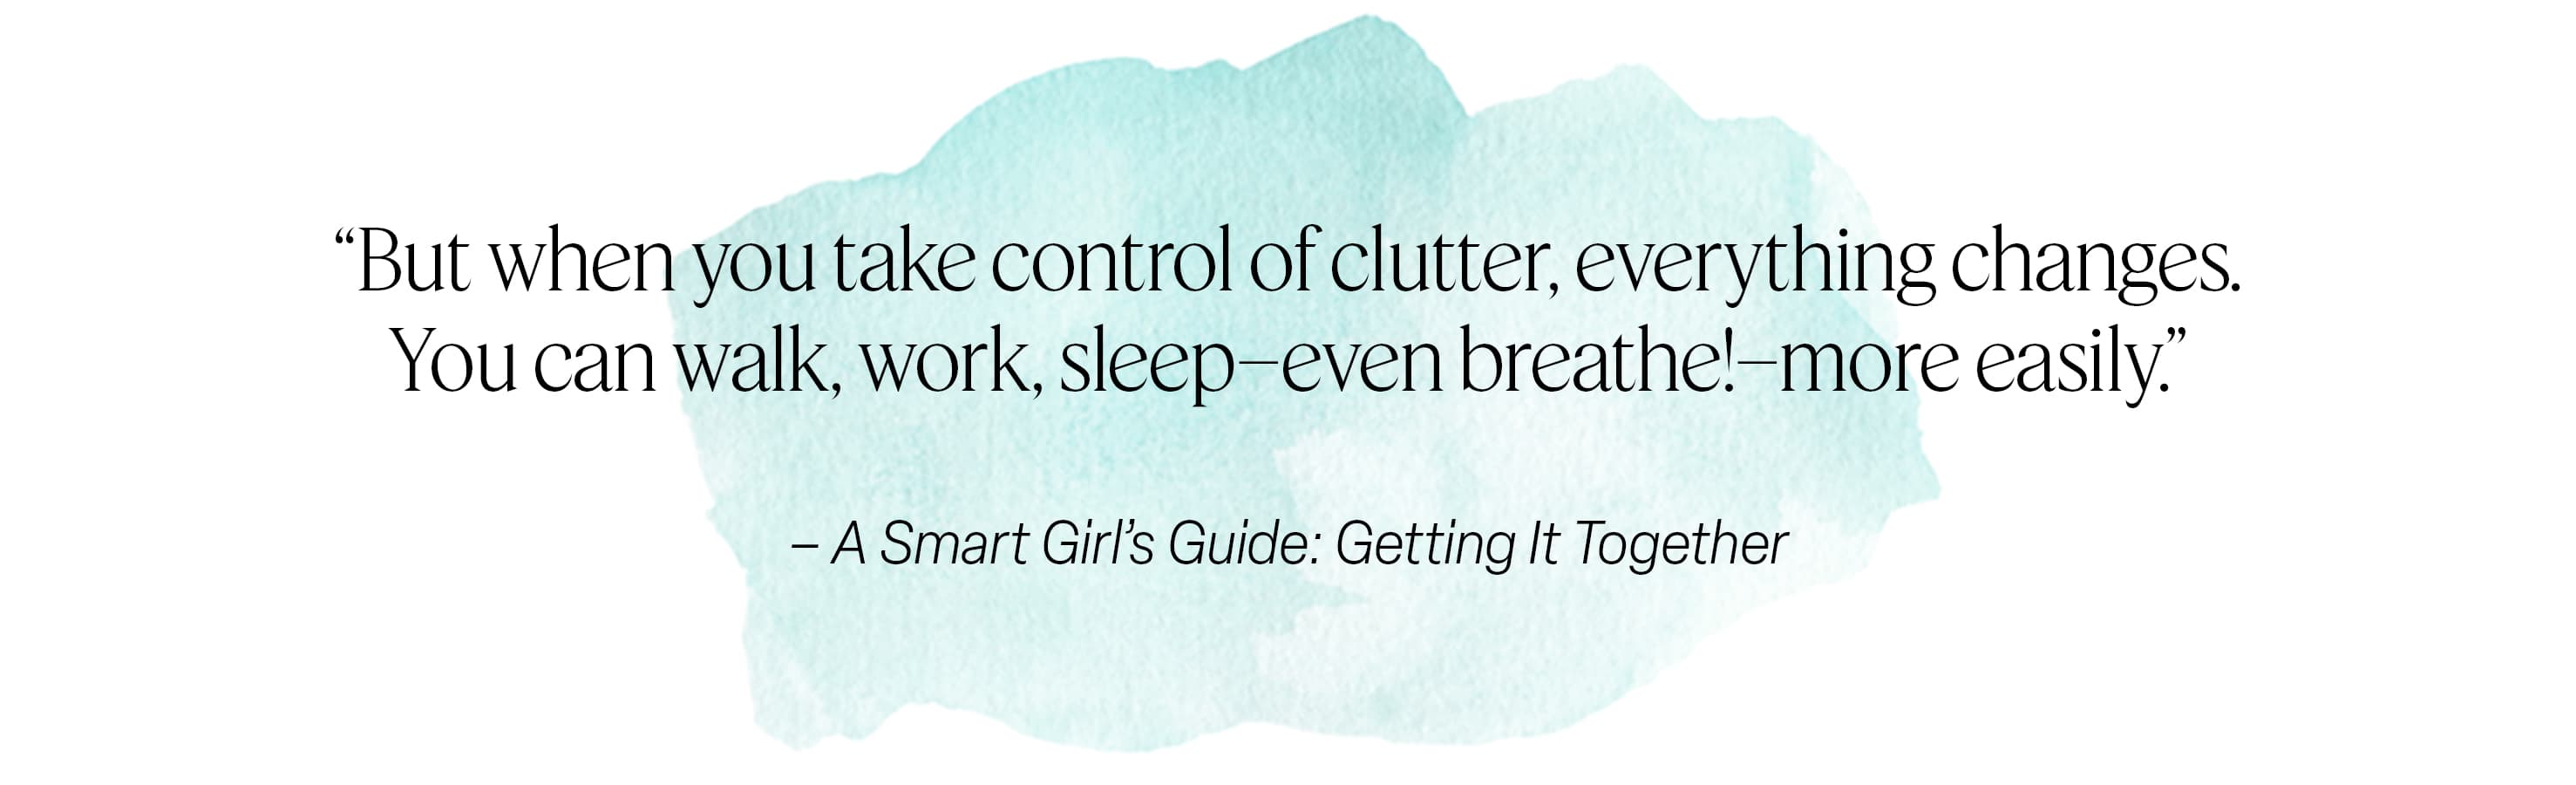 Graphic that has quote from A Smart Girl's Guide: Getting it Together